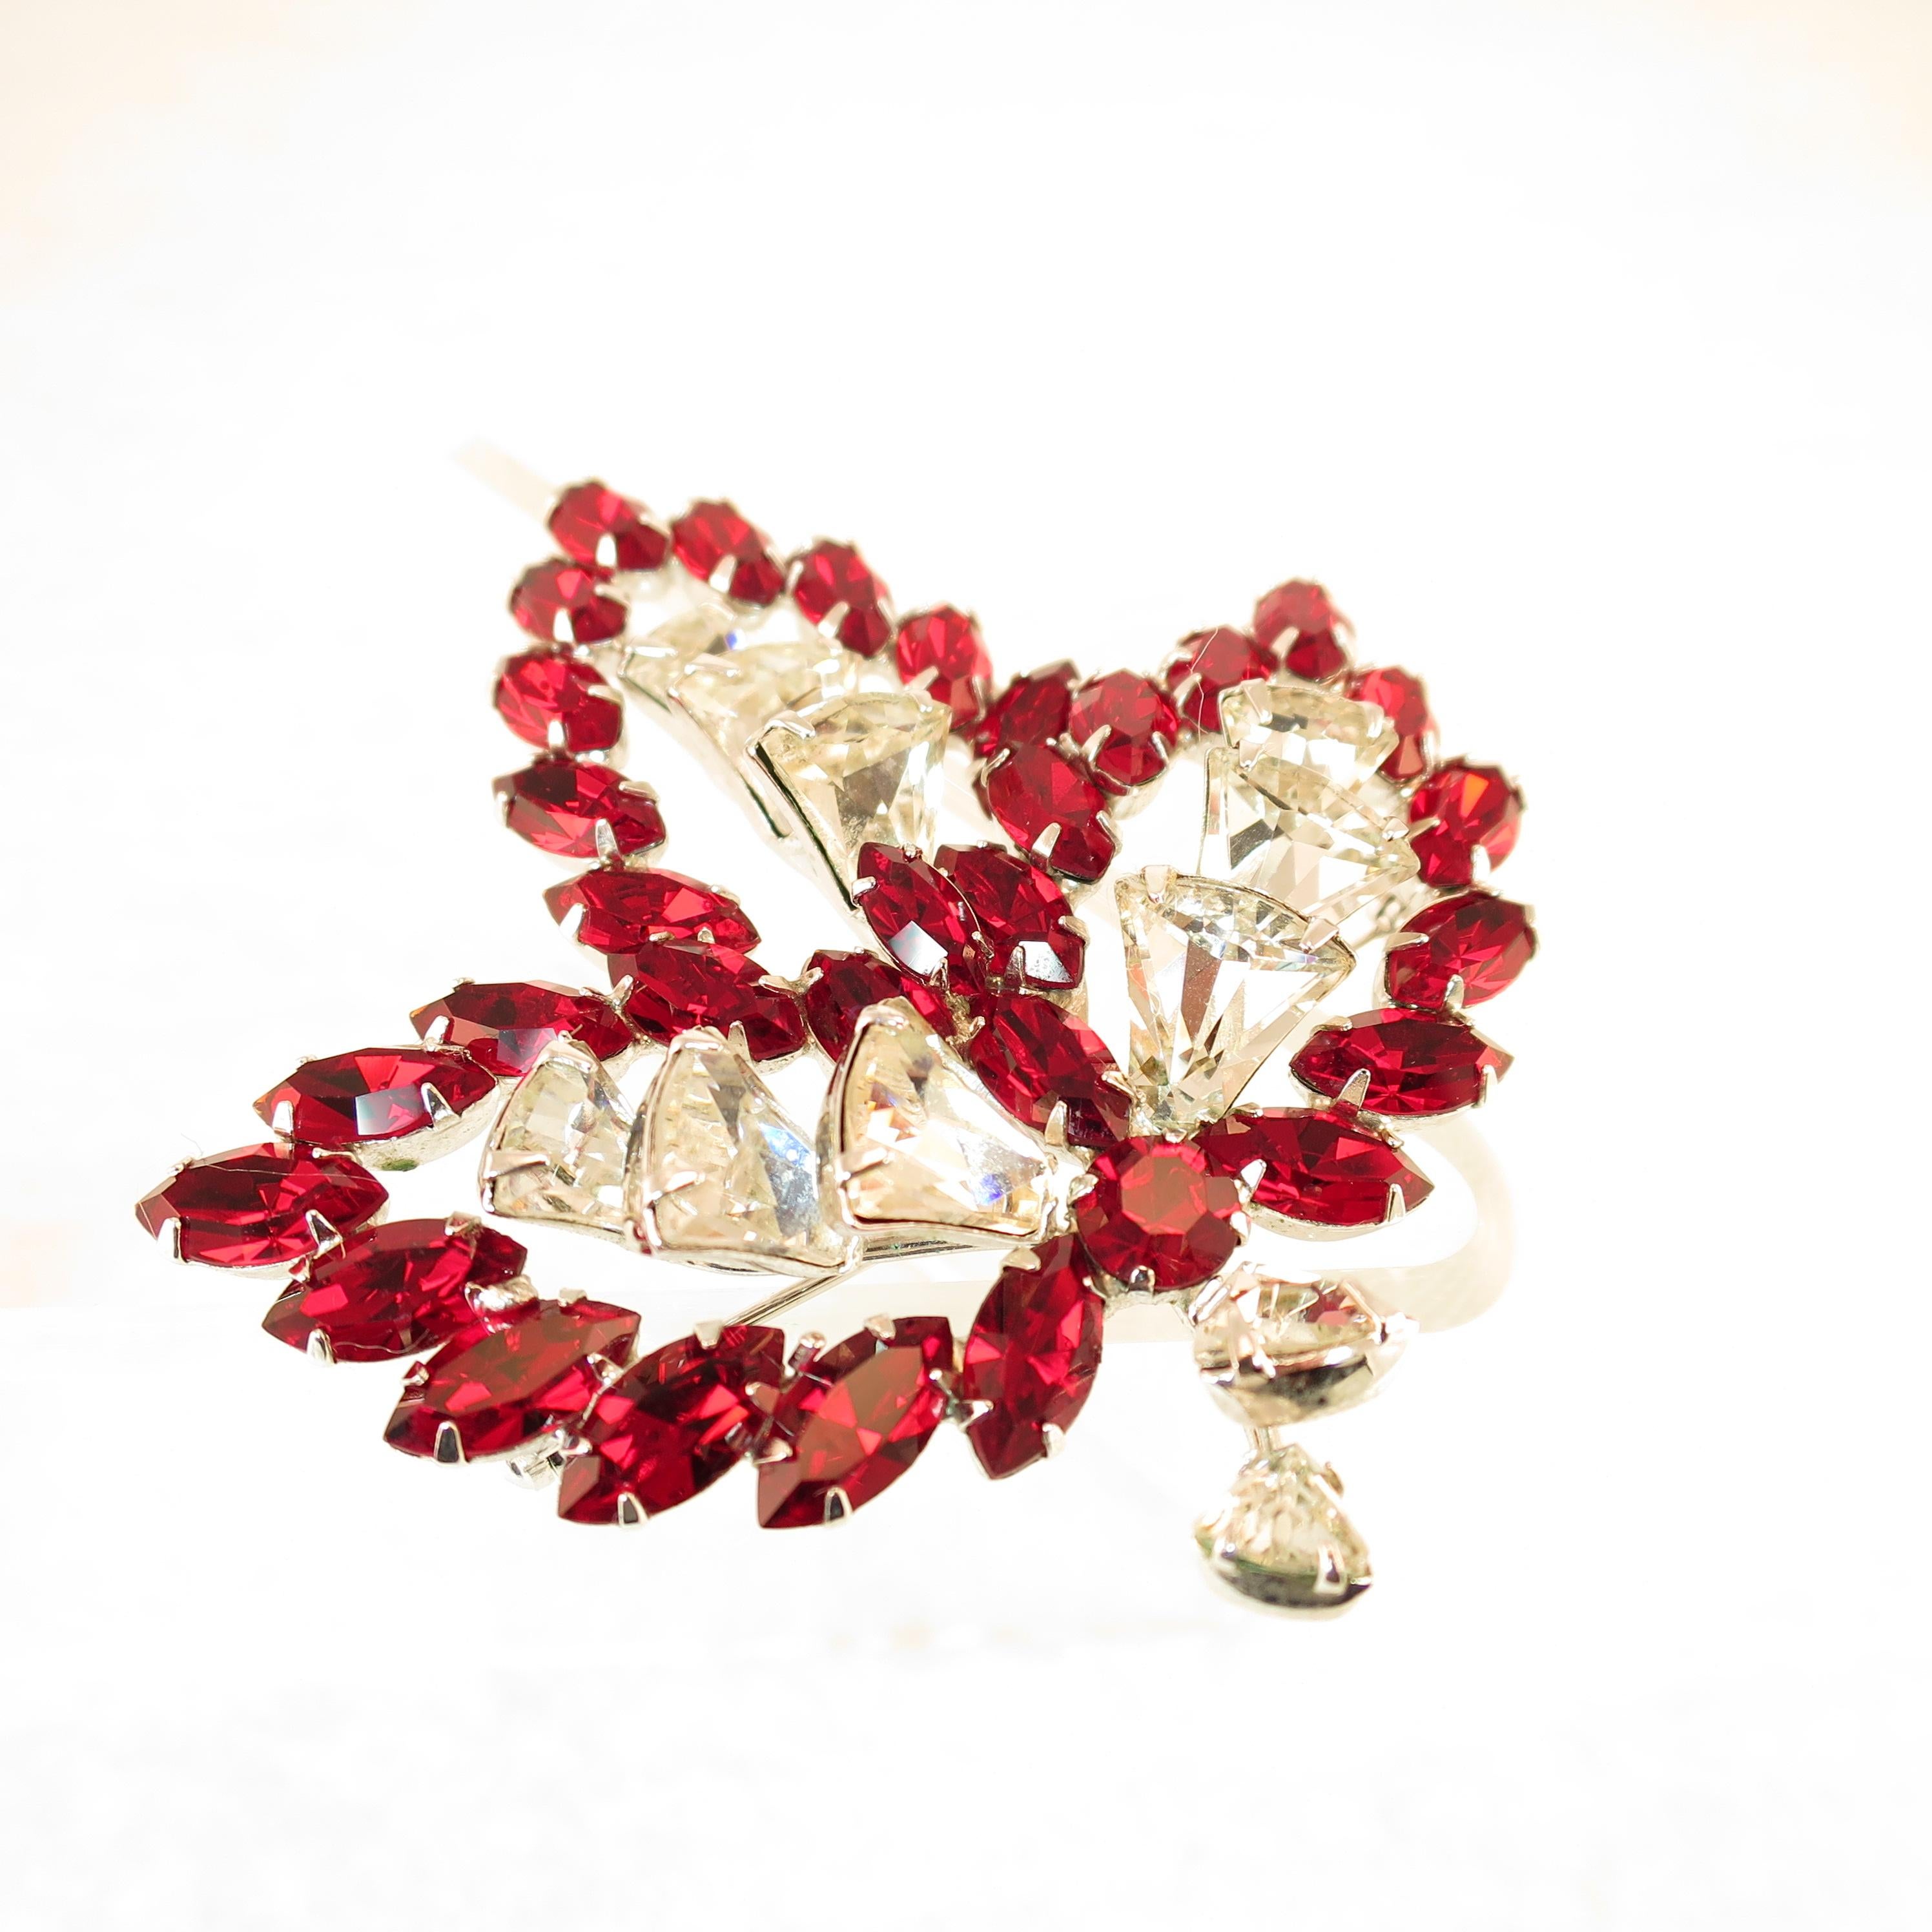 Vendome Ruby Crystal Leaf Brooch 1950s In Excellent Condition For Sale In Burbank, CA